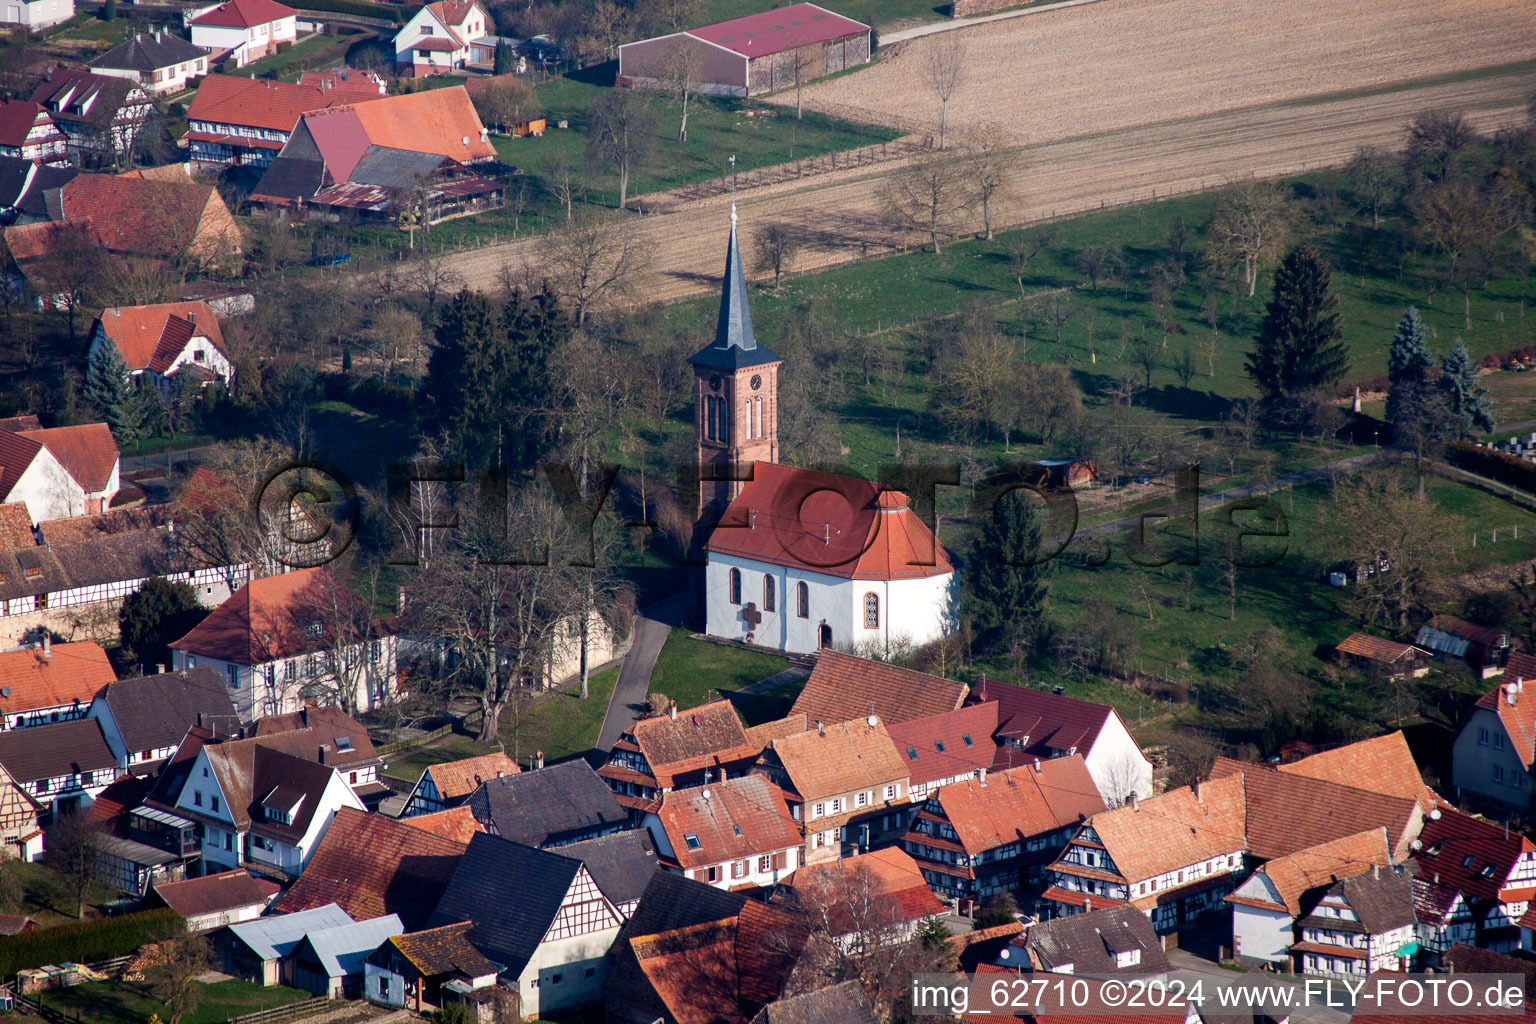 Aerial view of Protestant Church building in the village of in Hunspach in Grand Est, France